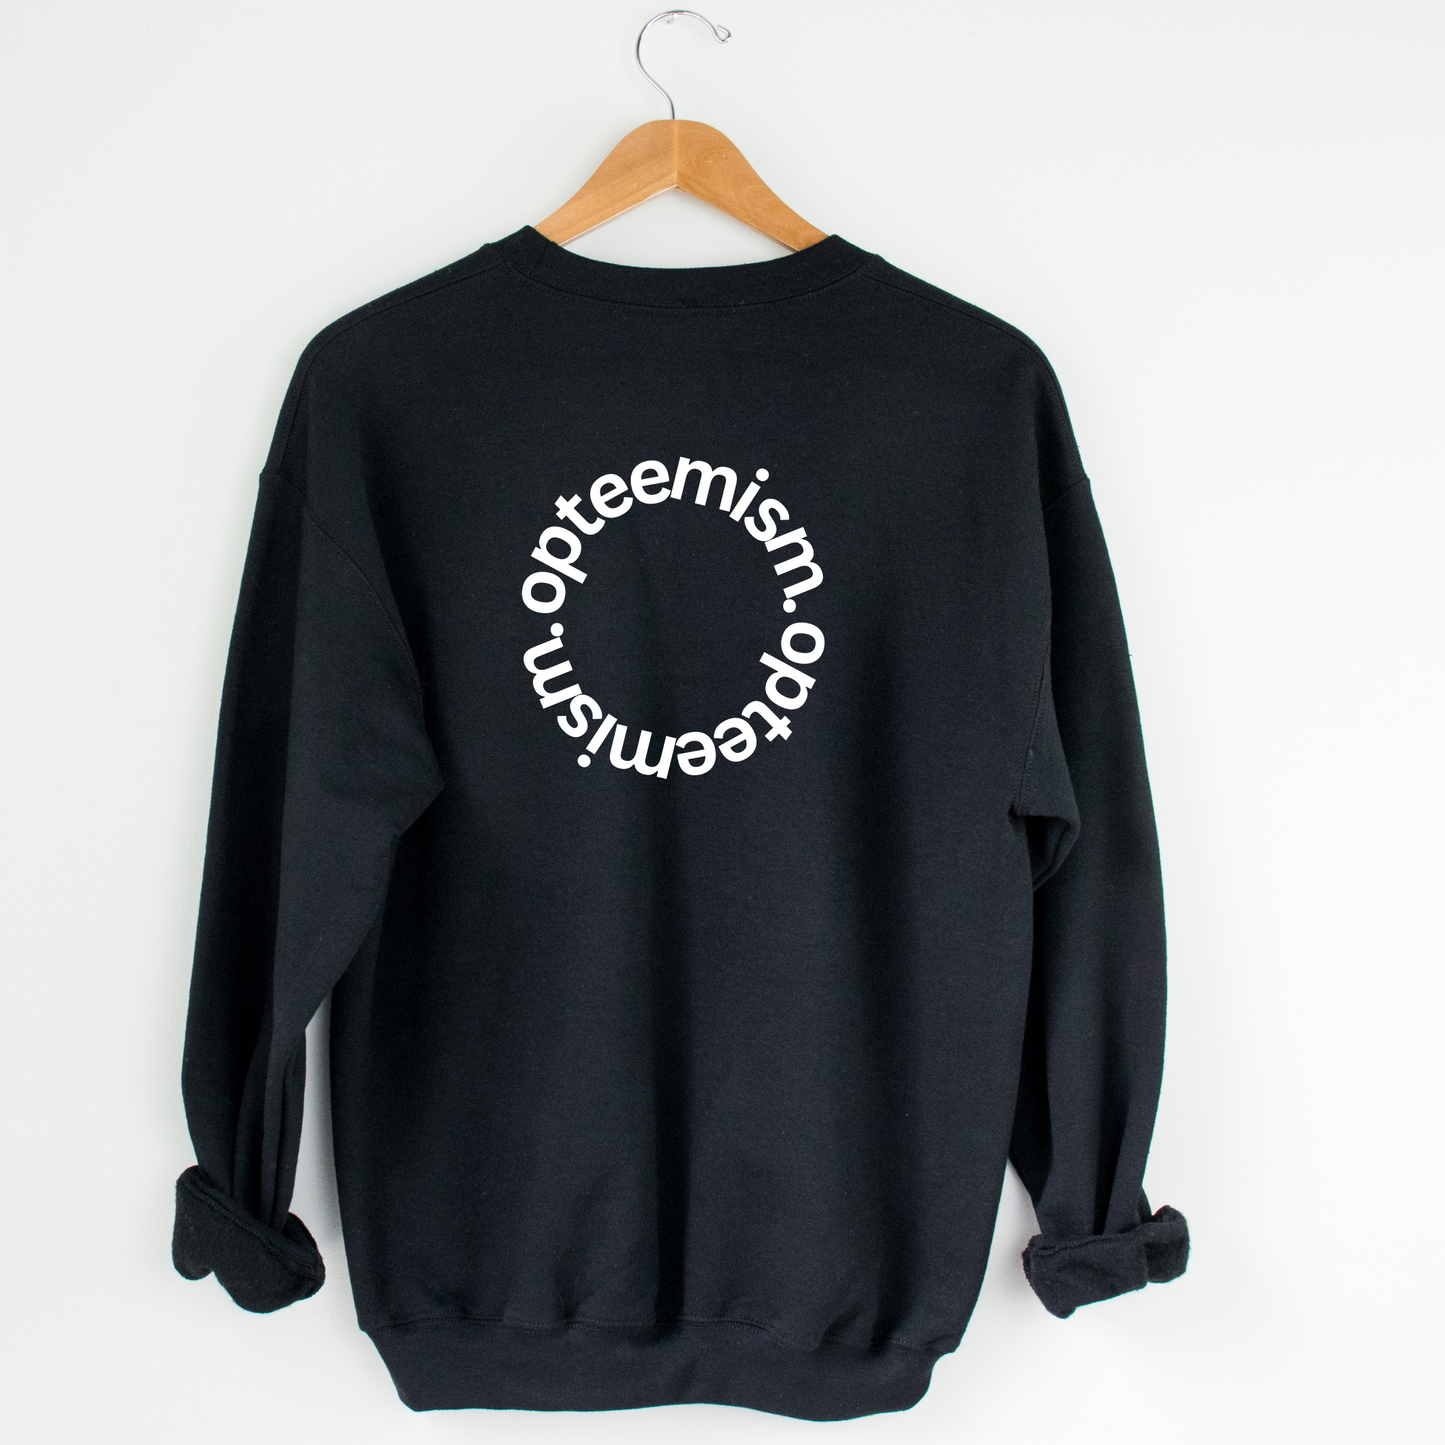 The Future You is Going To Be Proud Crew Neck Graphic Sweater